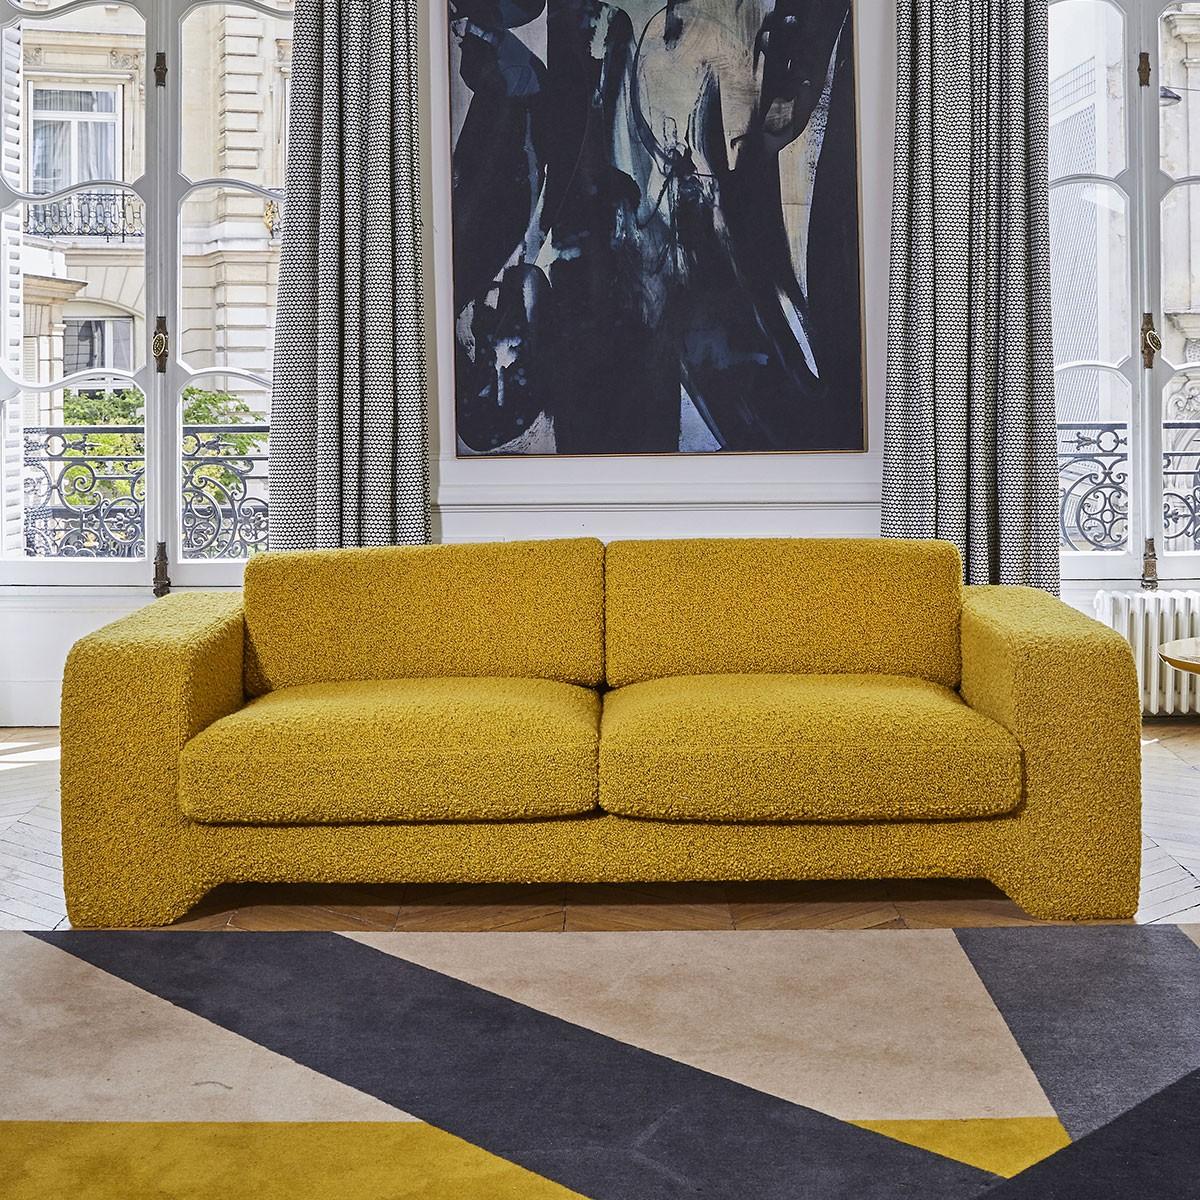 Popus Editions Giovanna 4 Seater Sofa in Green (771727) Como Velvet Upholstery

Giovanna is a sofa with a strong profile. A sober, plush line, with this famous detail that changes everything, so as not to forget its strength of character and this